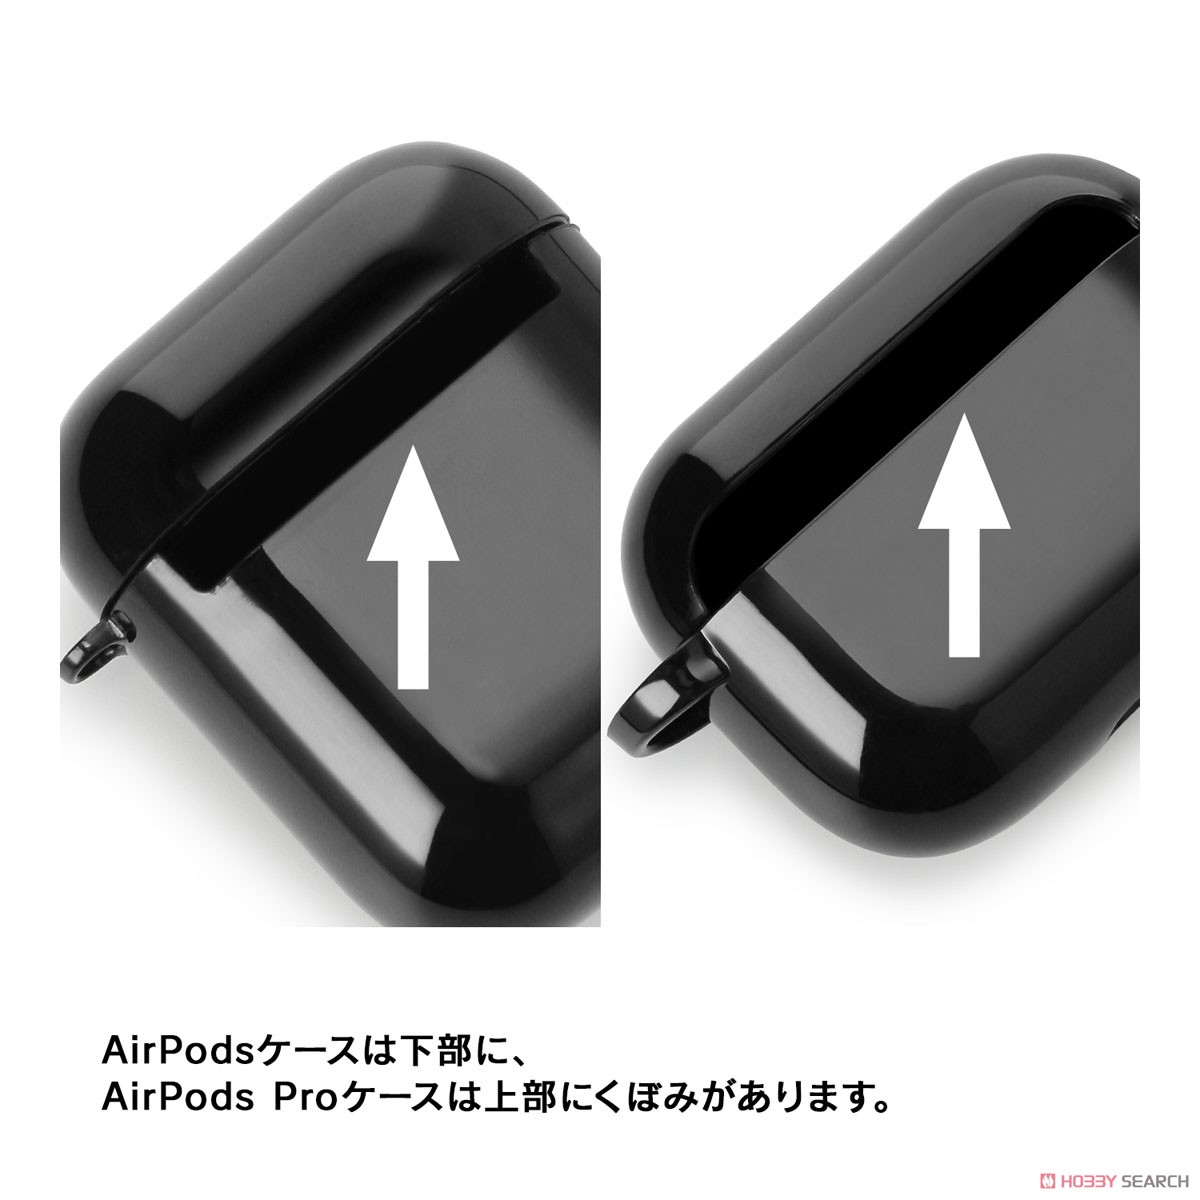 TVアニメ「最遊記RELOAD -ZEROIN-」 沙悟浄 AirPodsケース(対応機種/AirPods Pro) (キャラクターグッズ) その他の画像4